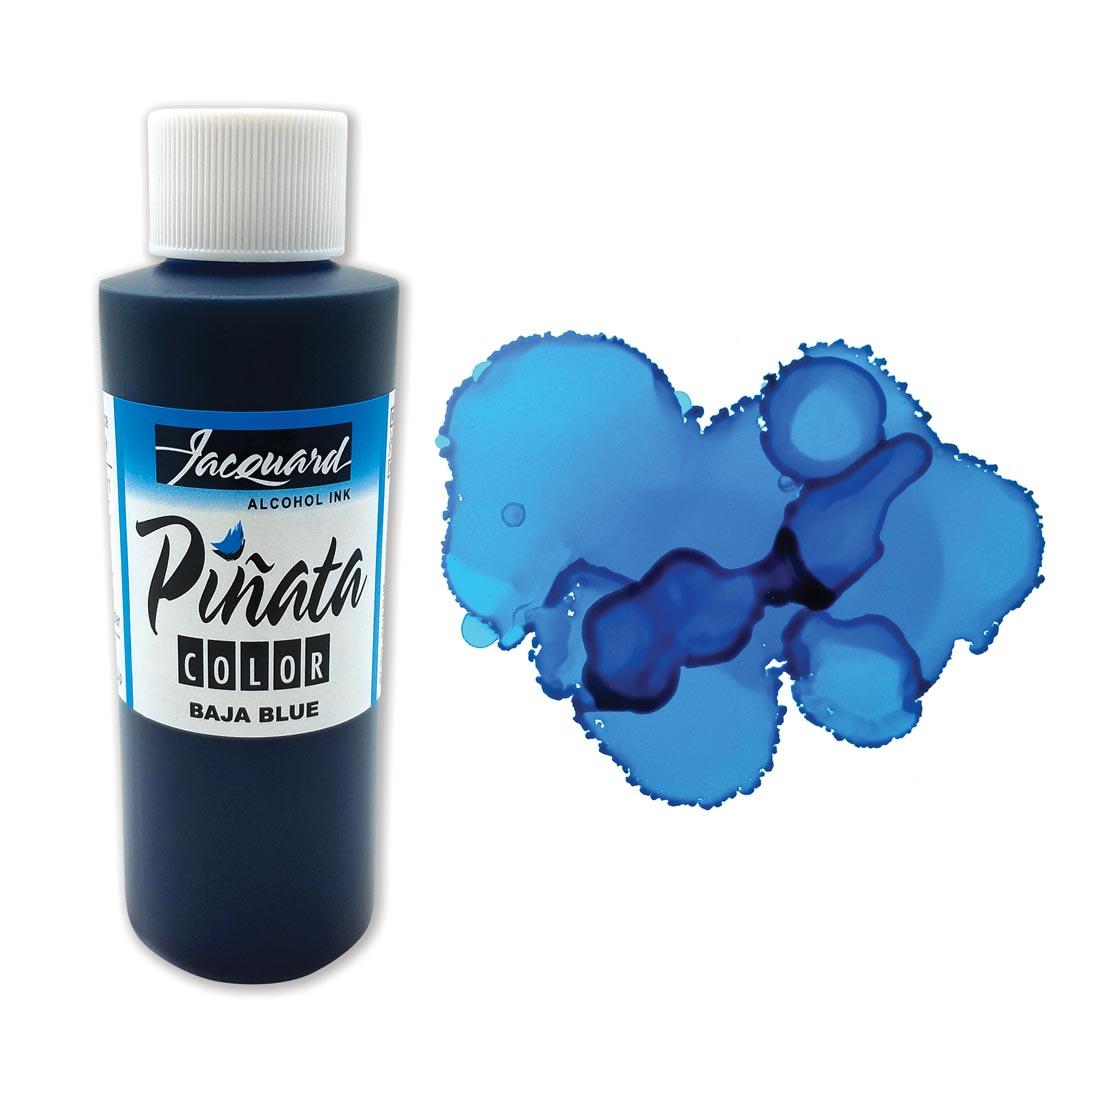 Bottle of Baja Blue Jacquard Pinata Color Alcohol Ink beside an example color swatch